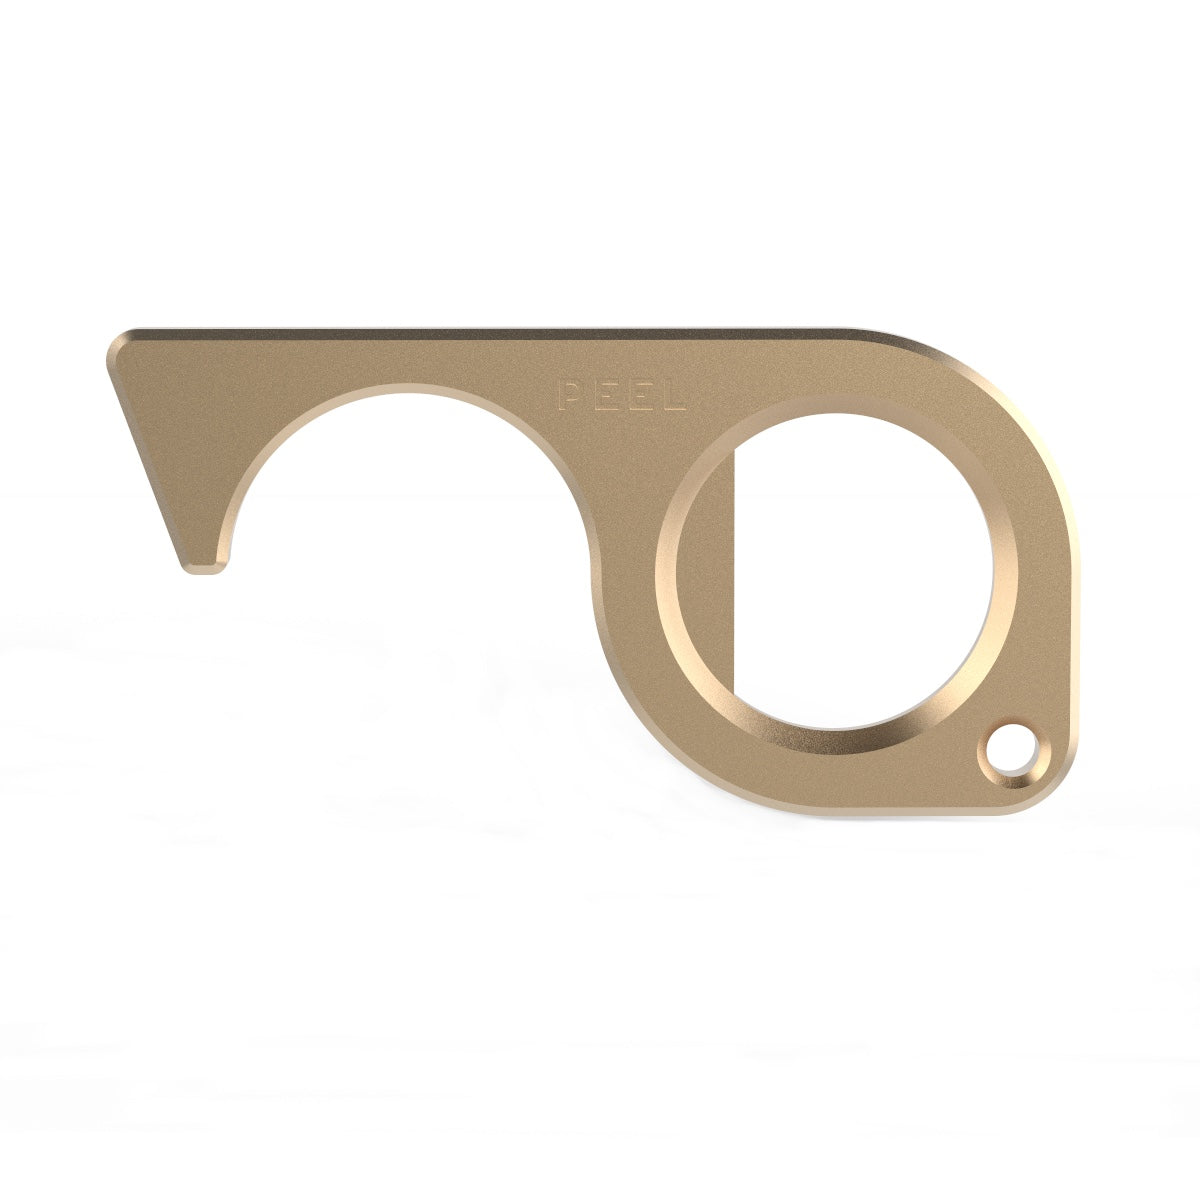 The Brass Keychain Touch Tool